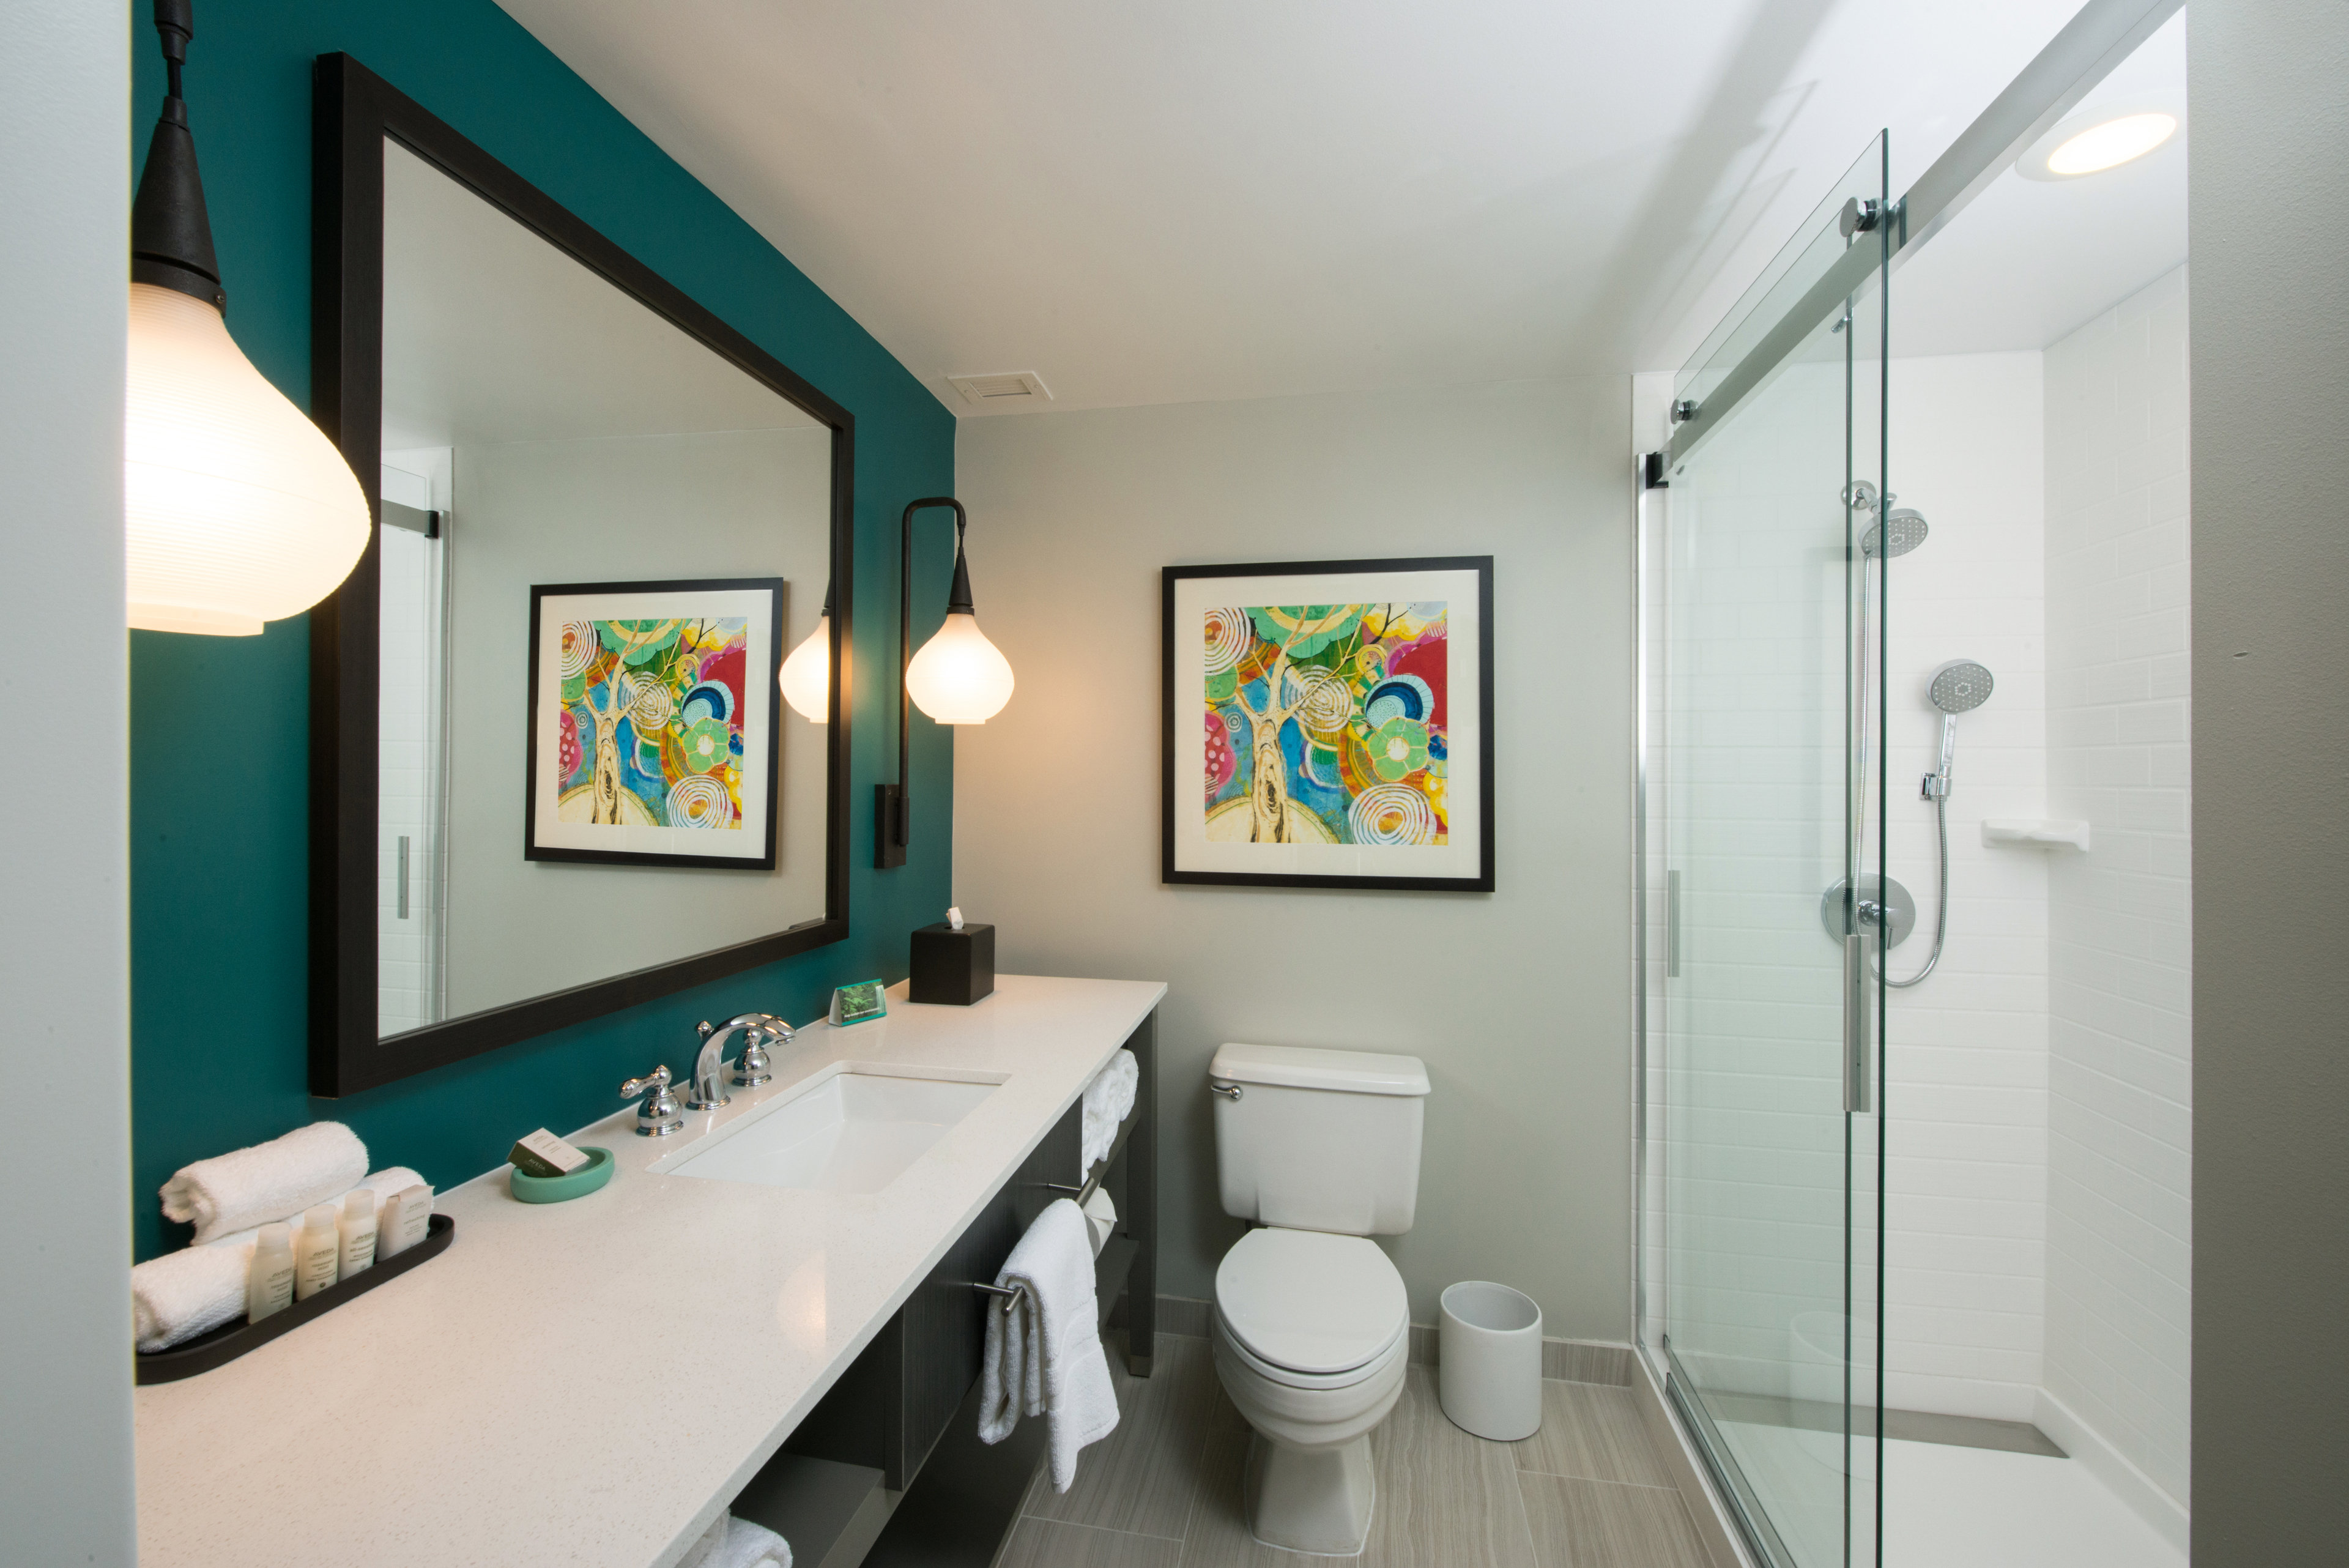 Our guest bathrooms have plenty of counter space to get ready